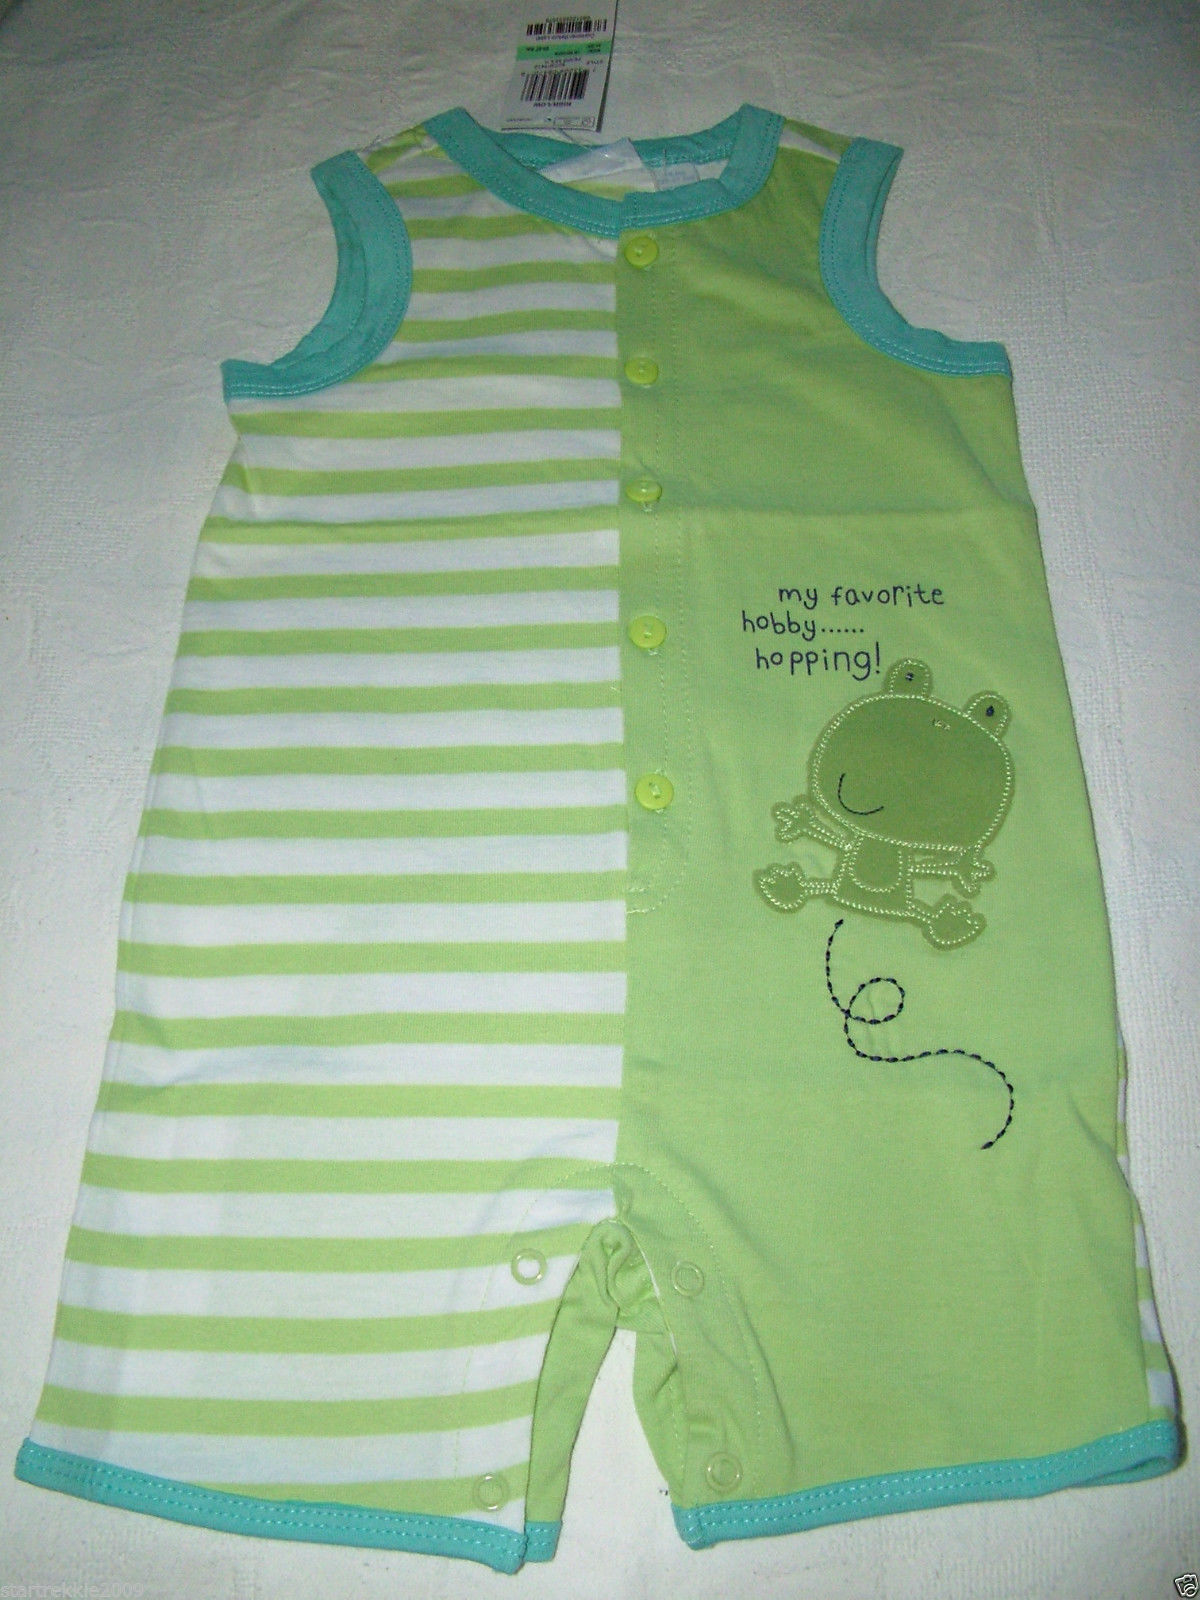 First Impressions Baby Boy Stripe/Solid Romper, Green Frog. Sz.12 Months, NWT - $9.99